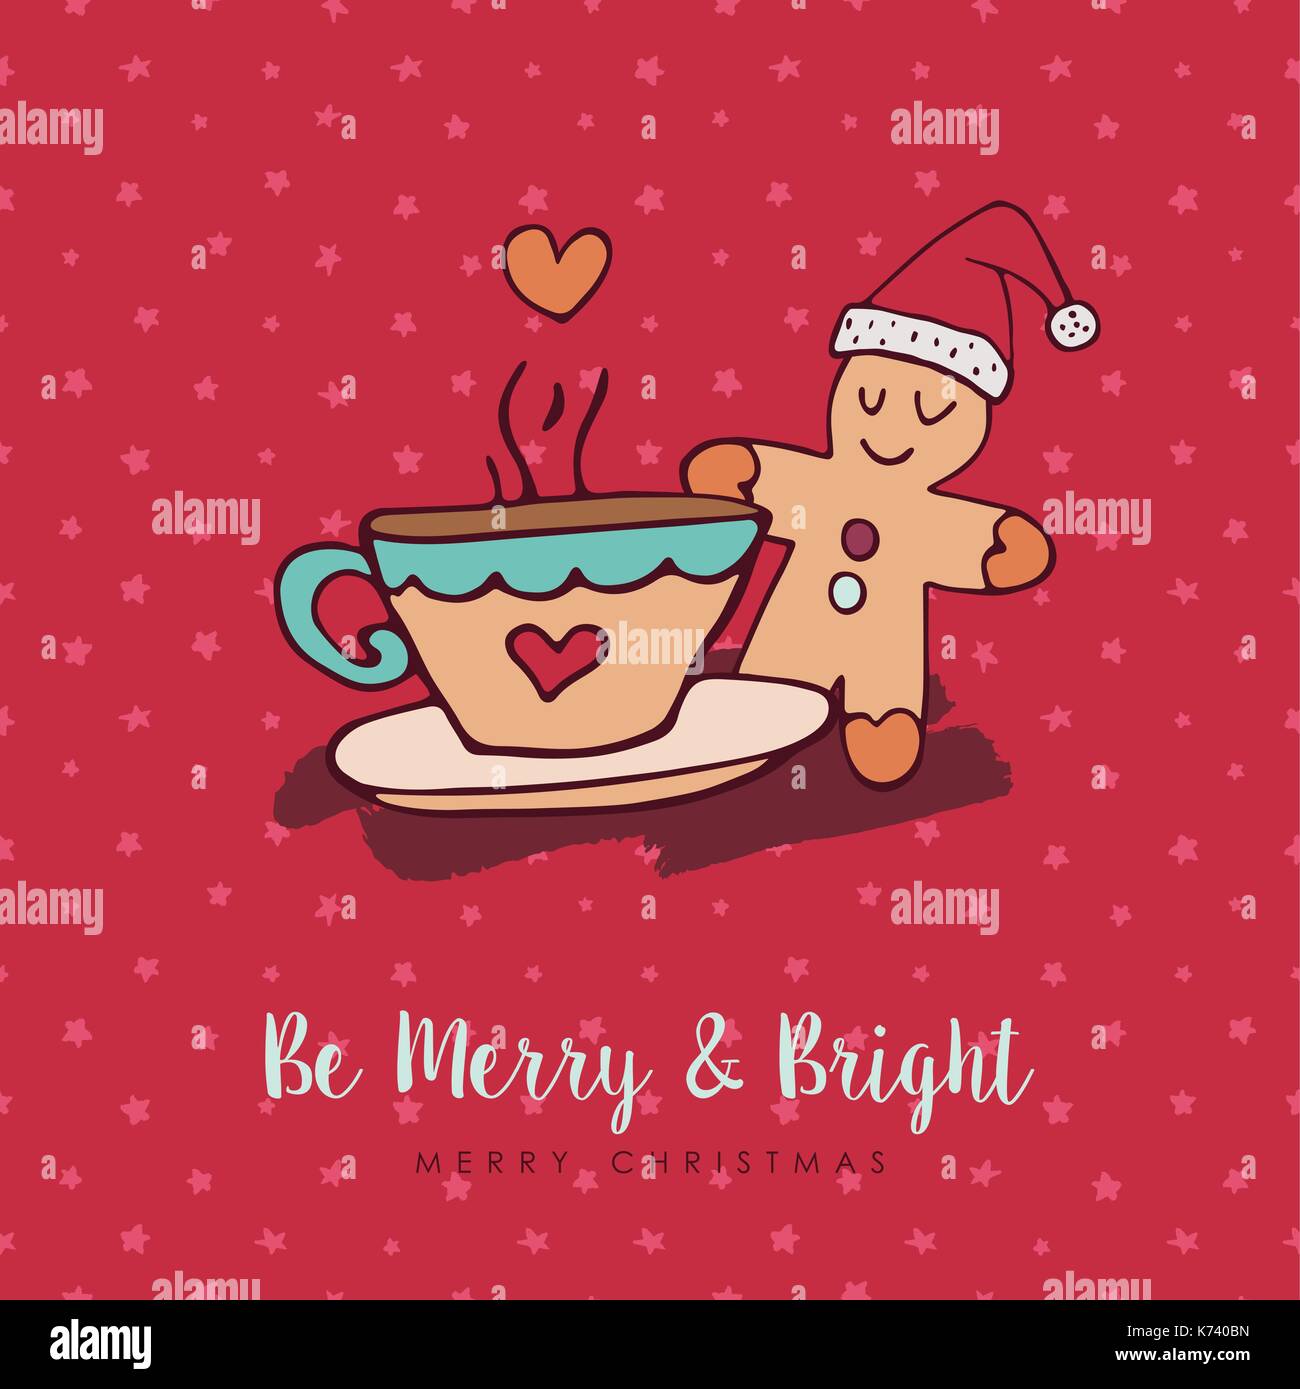 Merry Christmas red hand drawn winter food greeting card. Cute gingerbread man with hot cocoa mug and holiday typography quote. EPS10 vector. Stock Vector